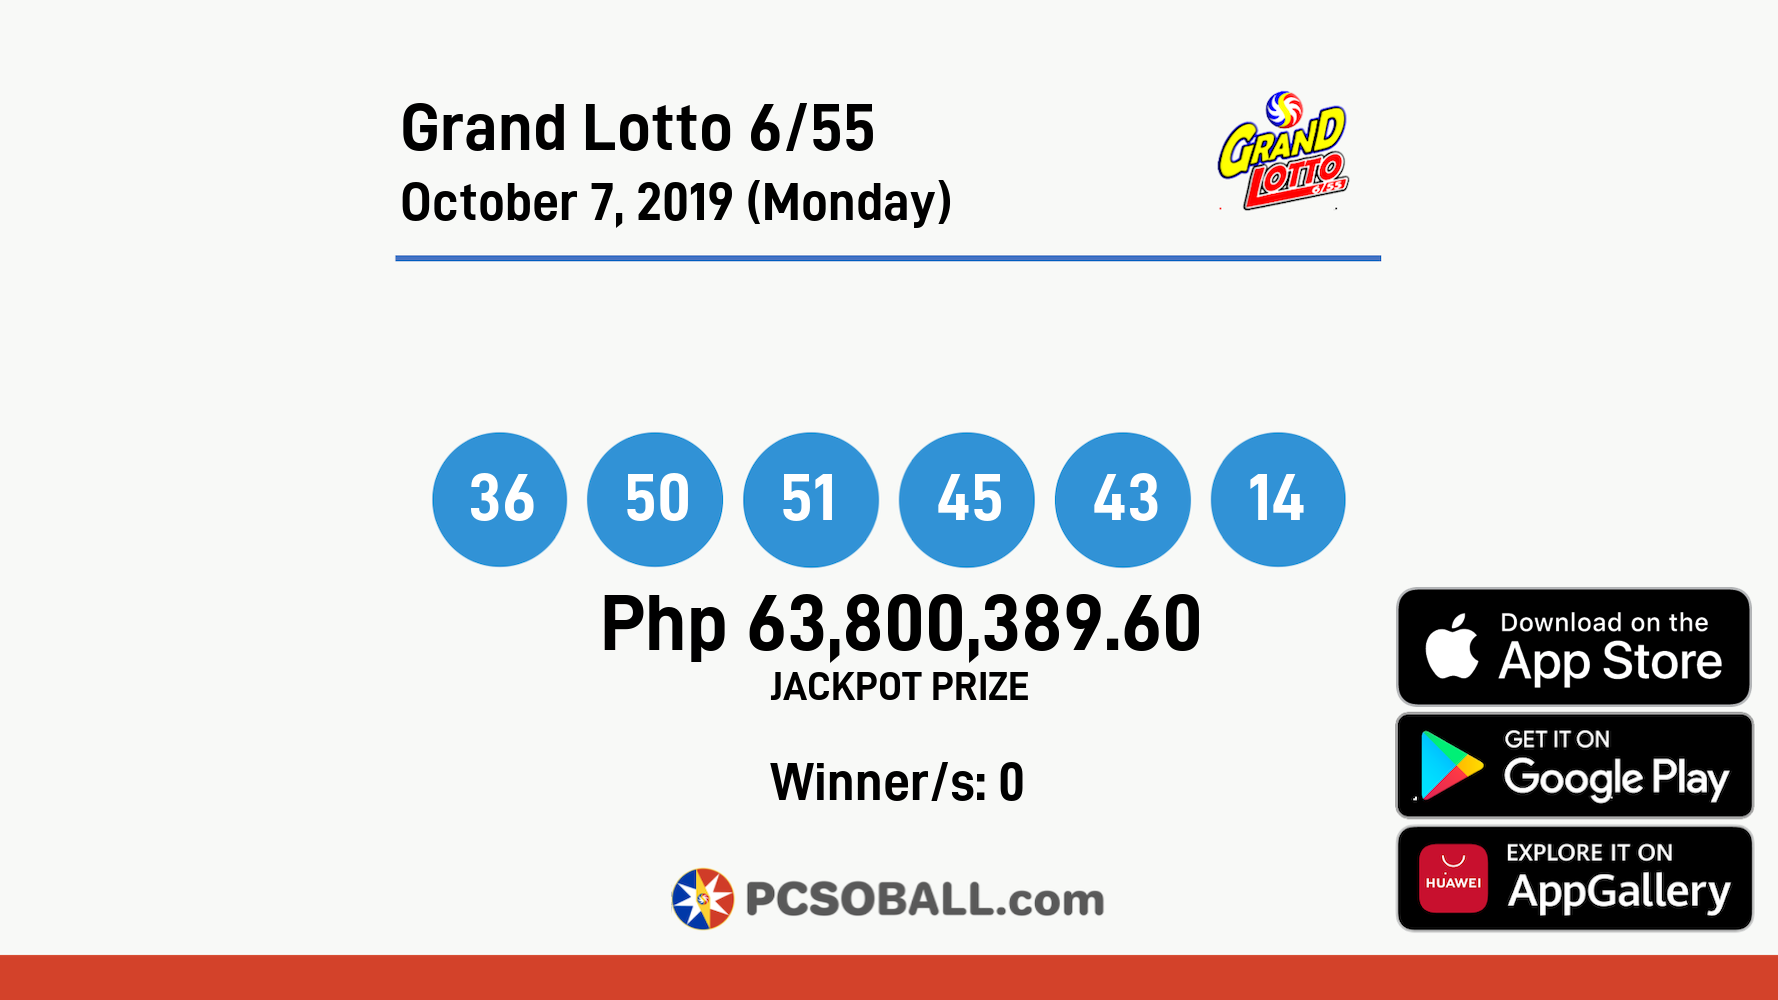 Grand Lotto 6/55 October 7, 2019 (Monday) Result